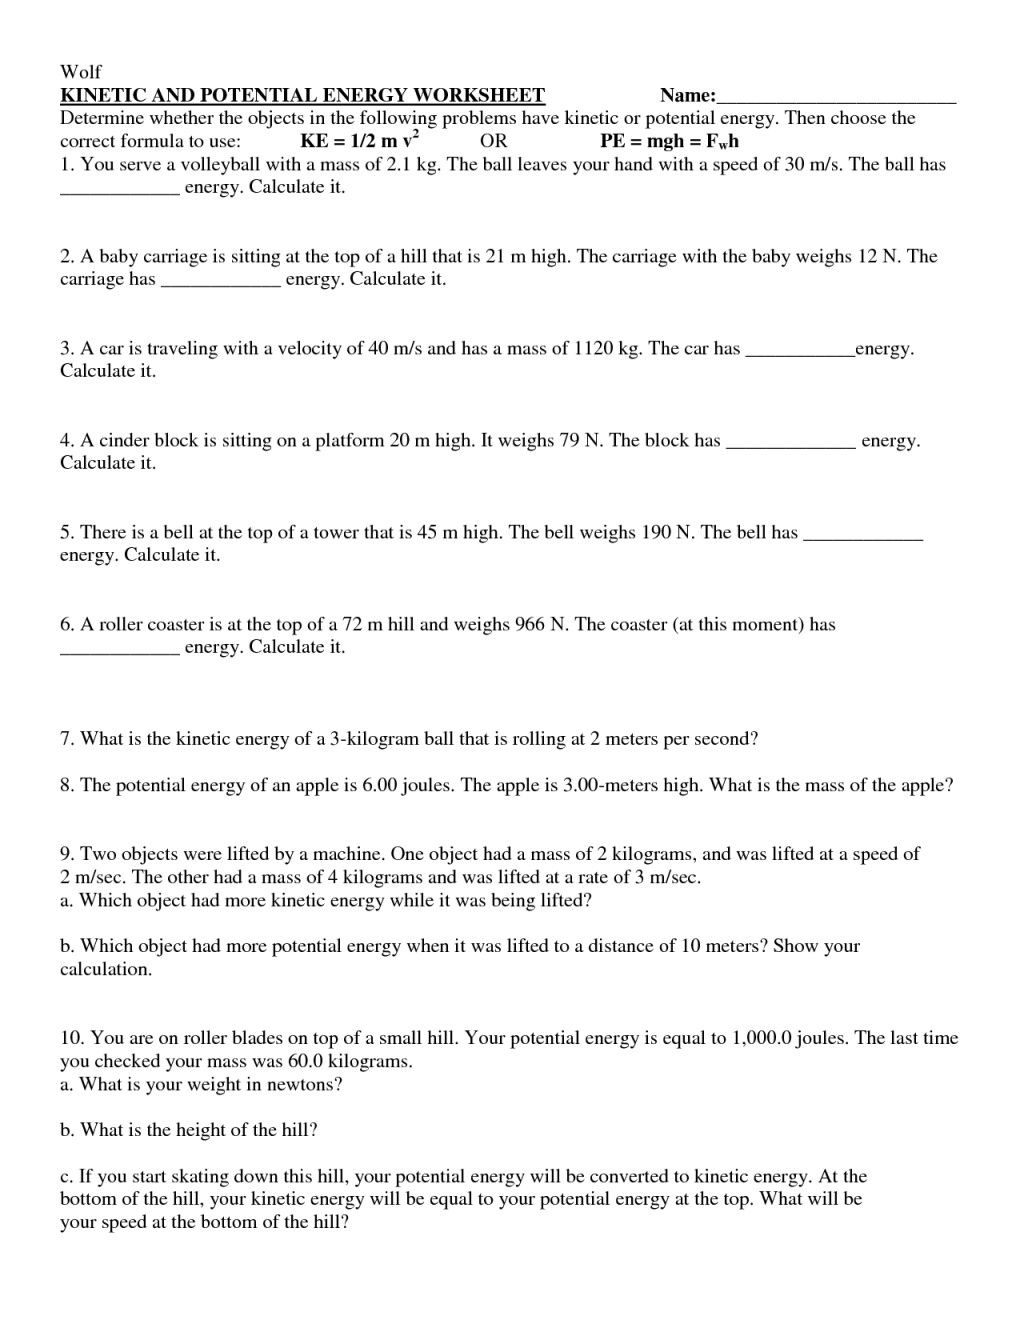 kinetic-and-potential-energy-problems-worksheet-answers-db-excel